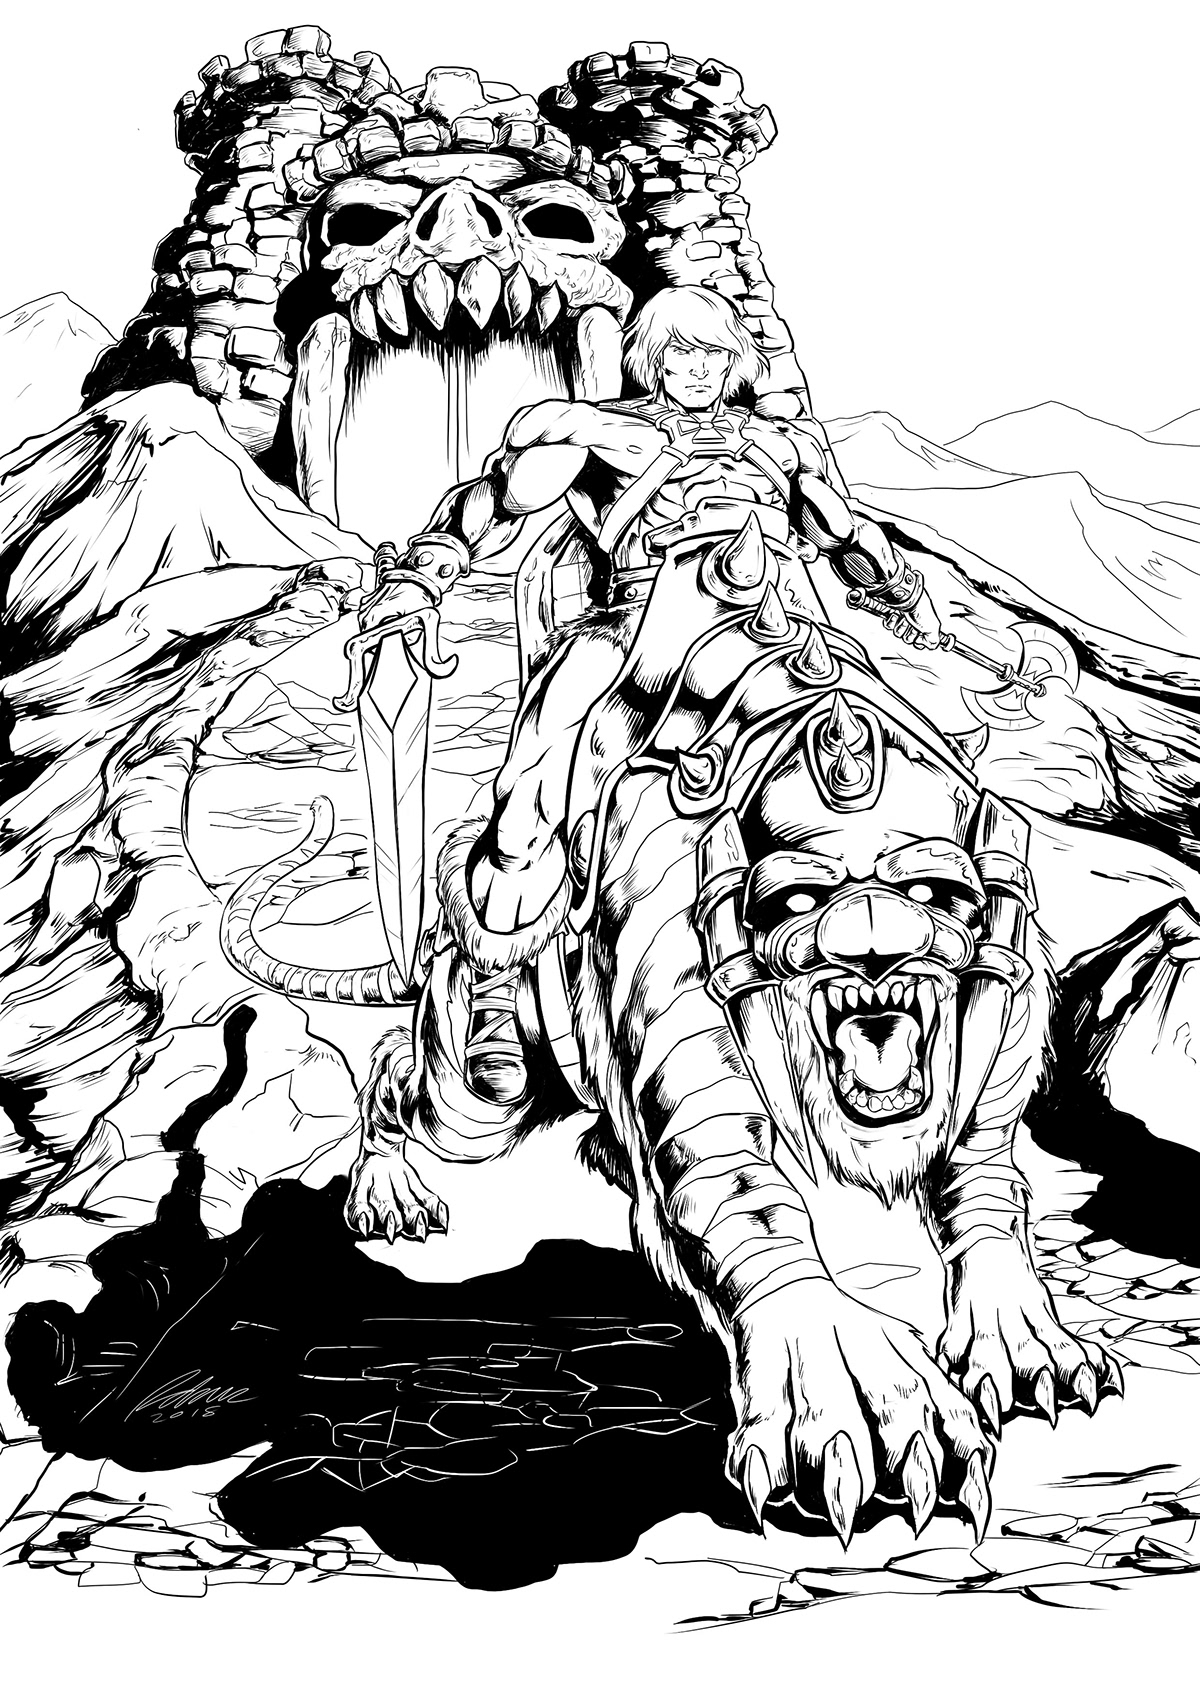 My take on He-Man and Battlecat ready for battle. Digitally sketched and drawn.